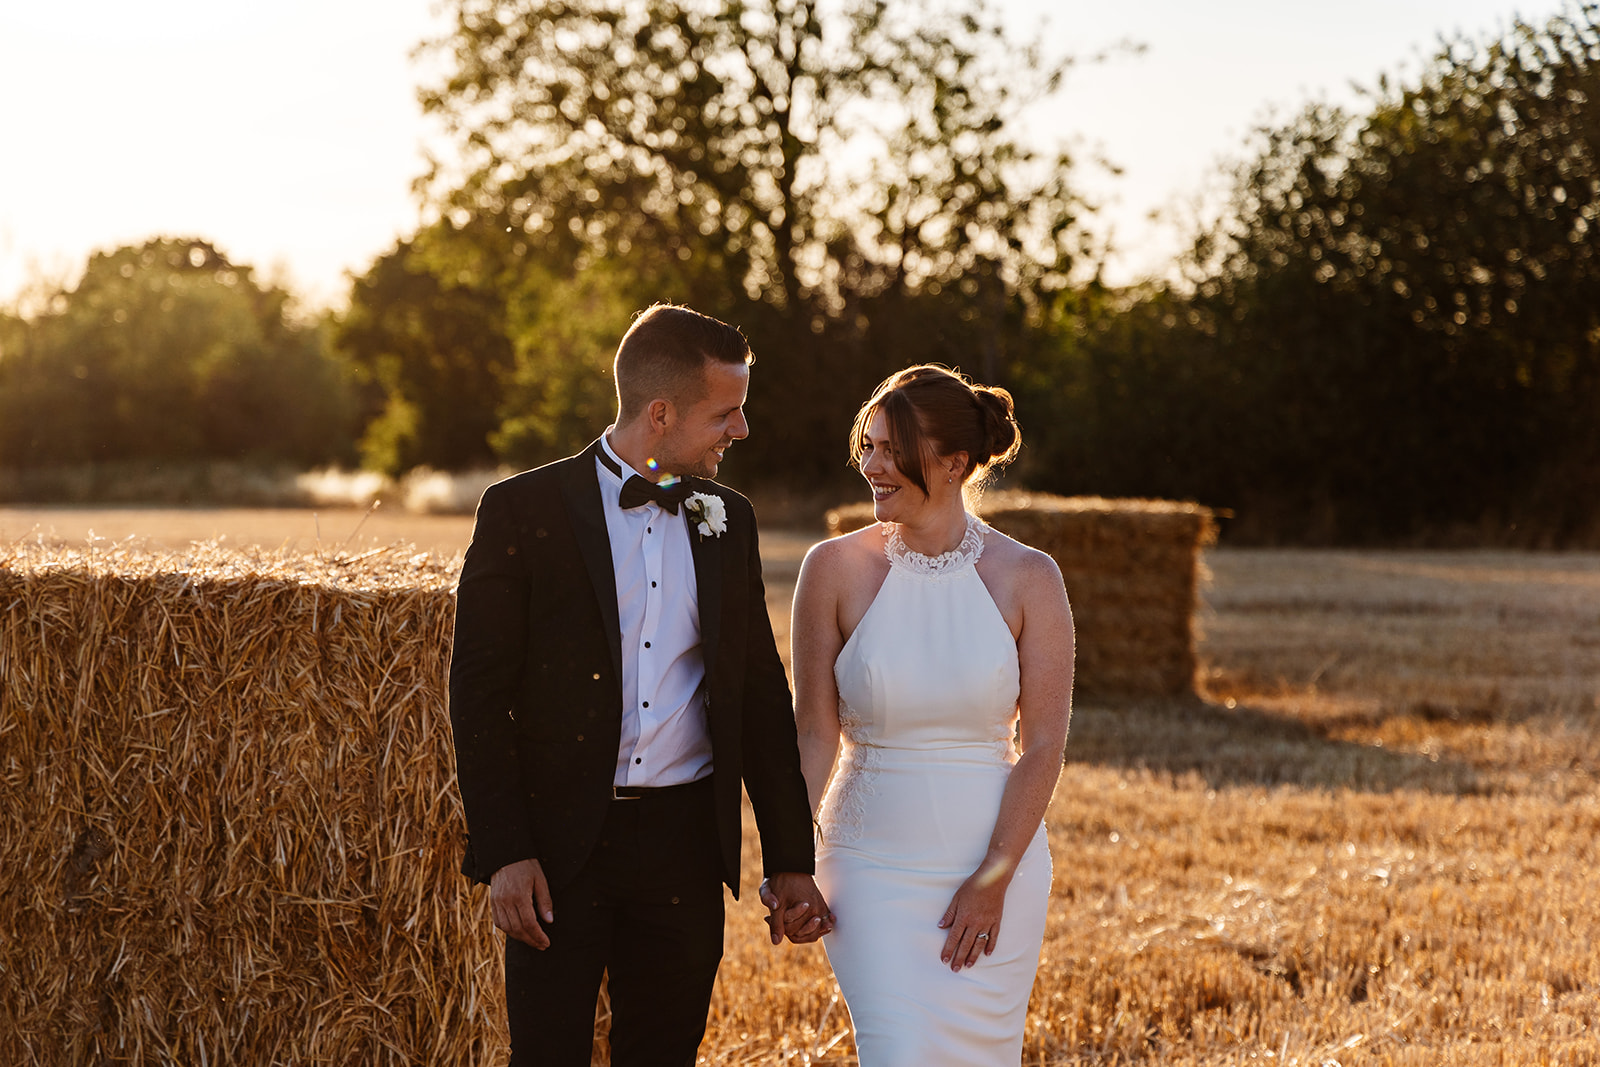 Couple take a walk at sunset in a field with trees and hay bales, smiling at each other. 